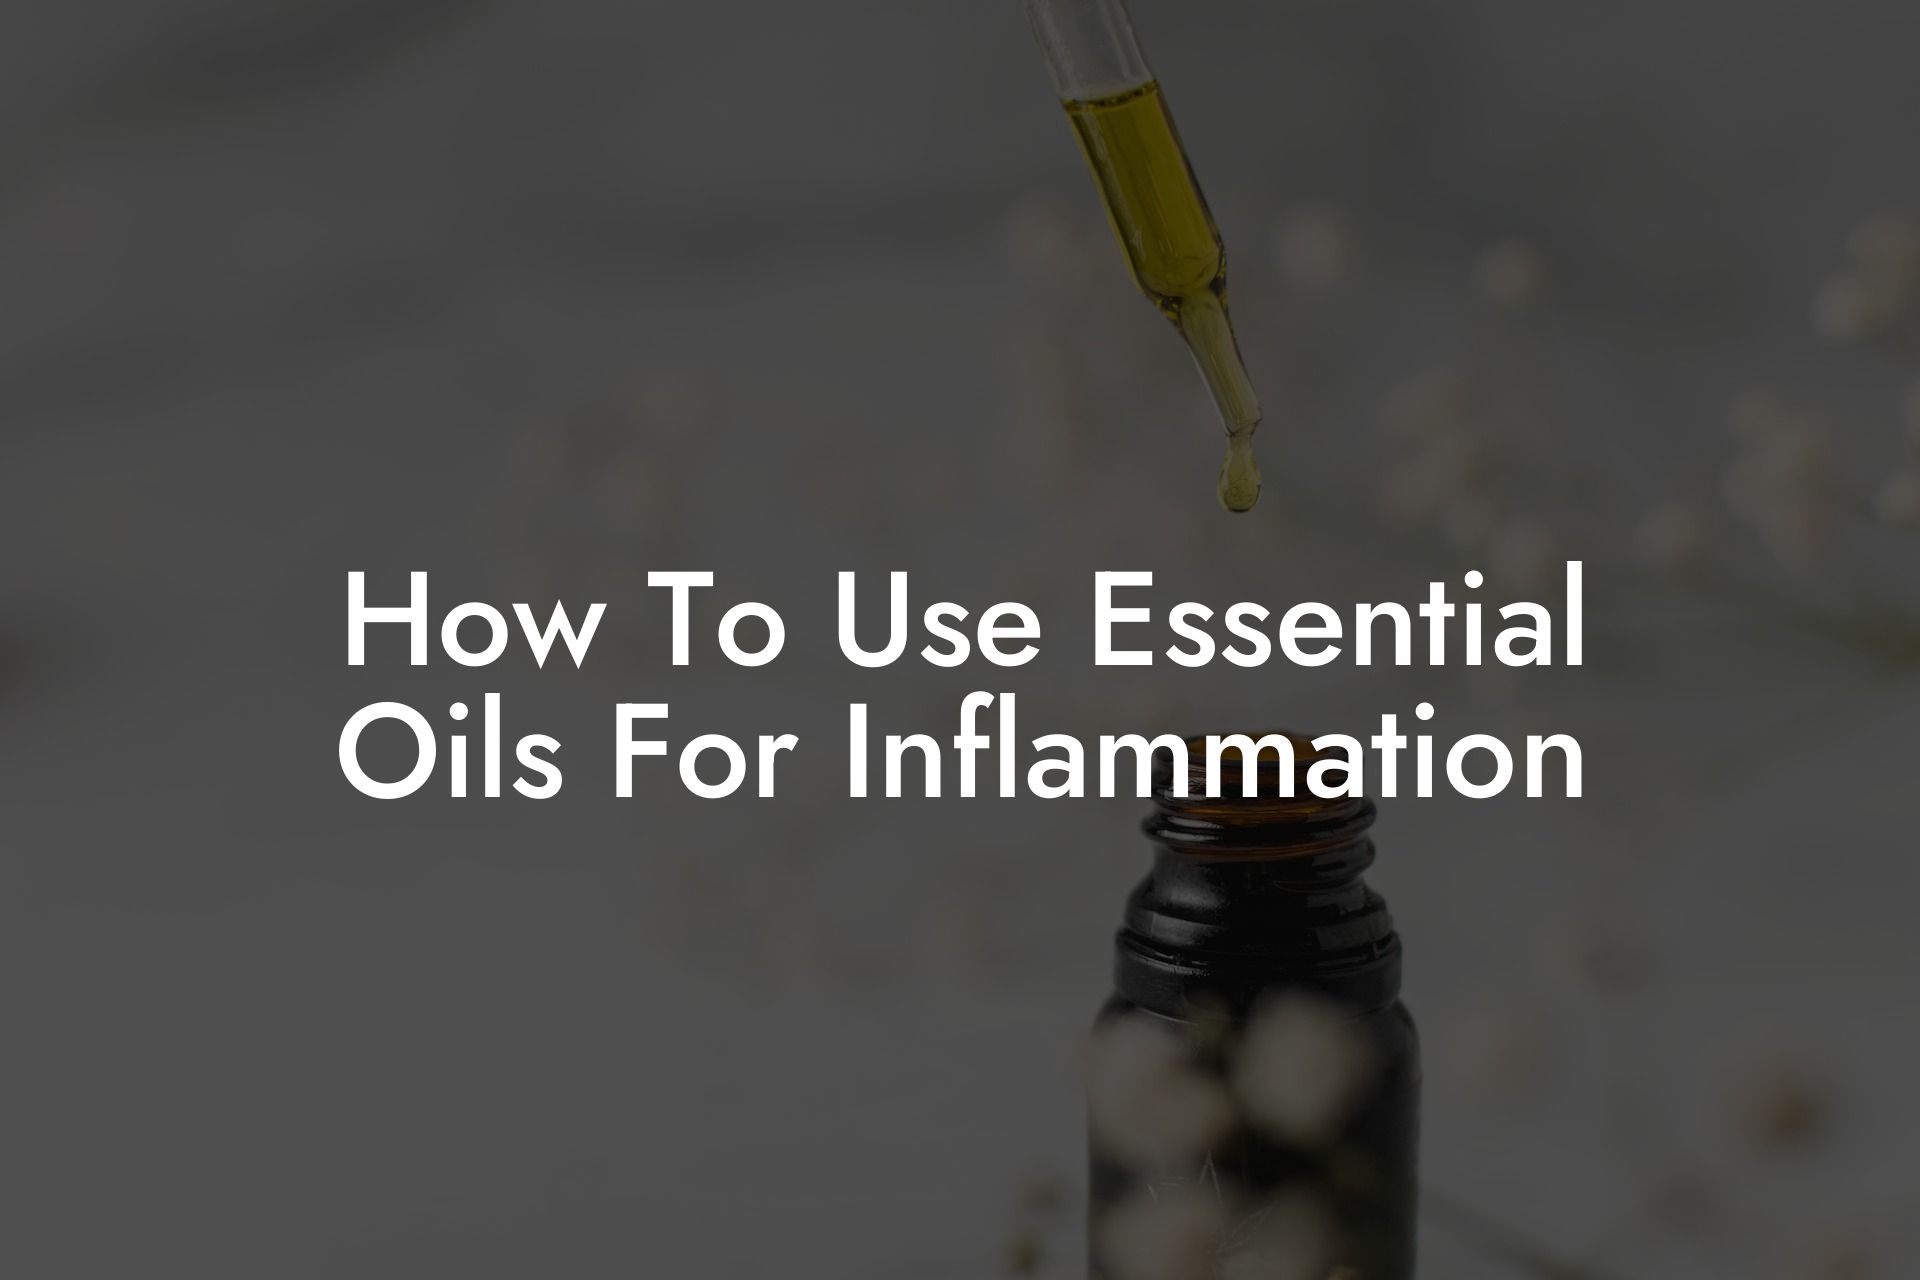 How To Use Essential Oils For Inflammation